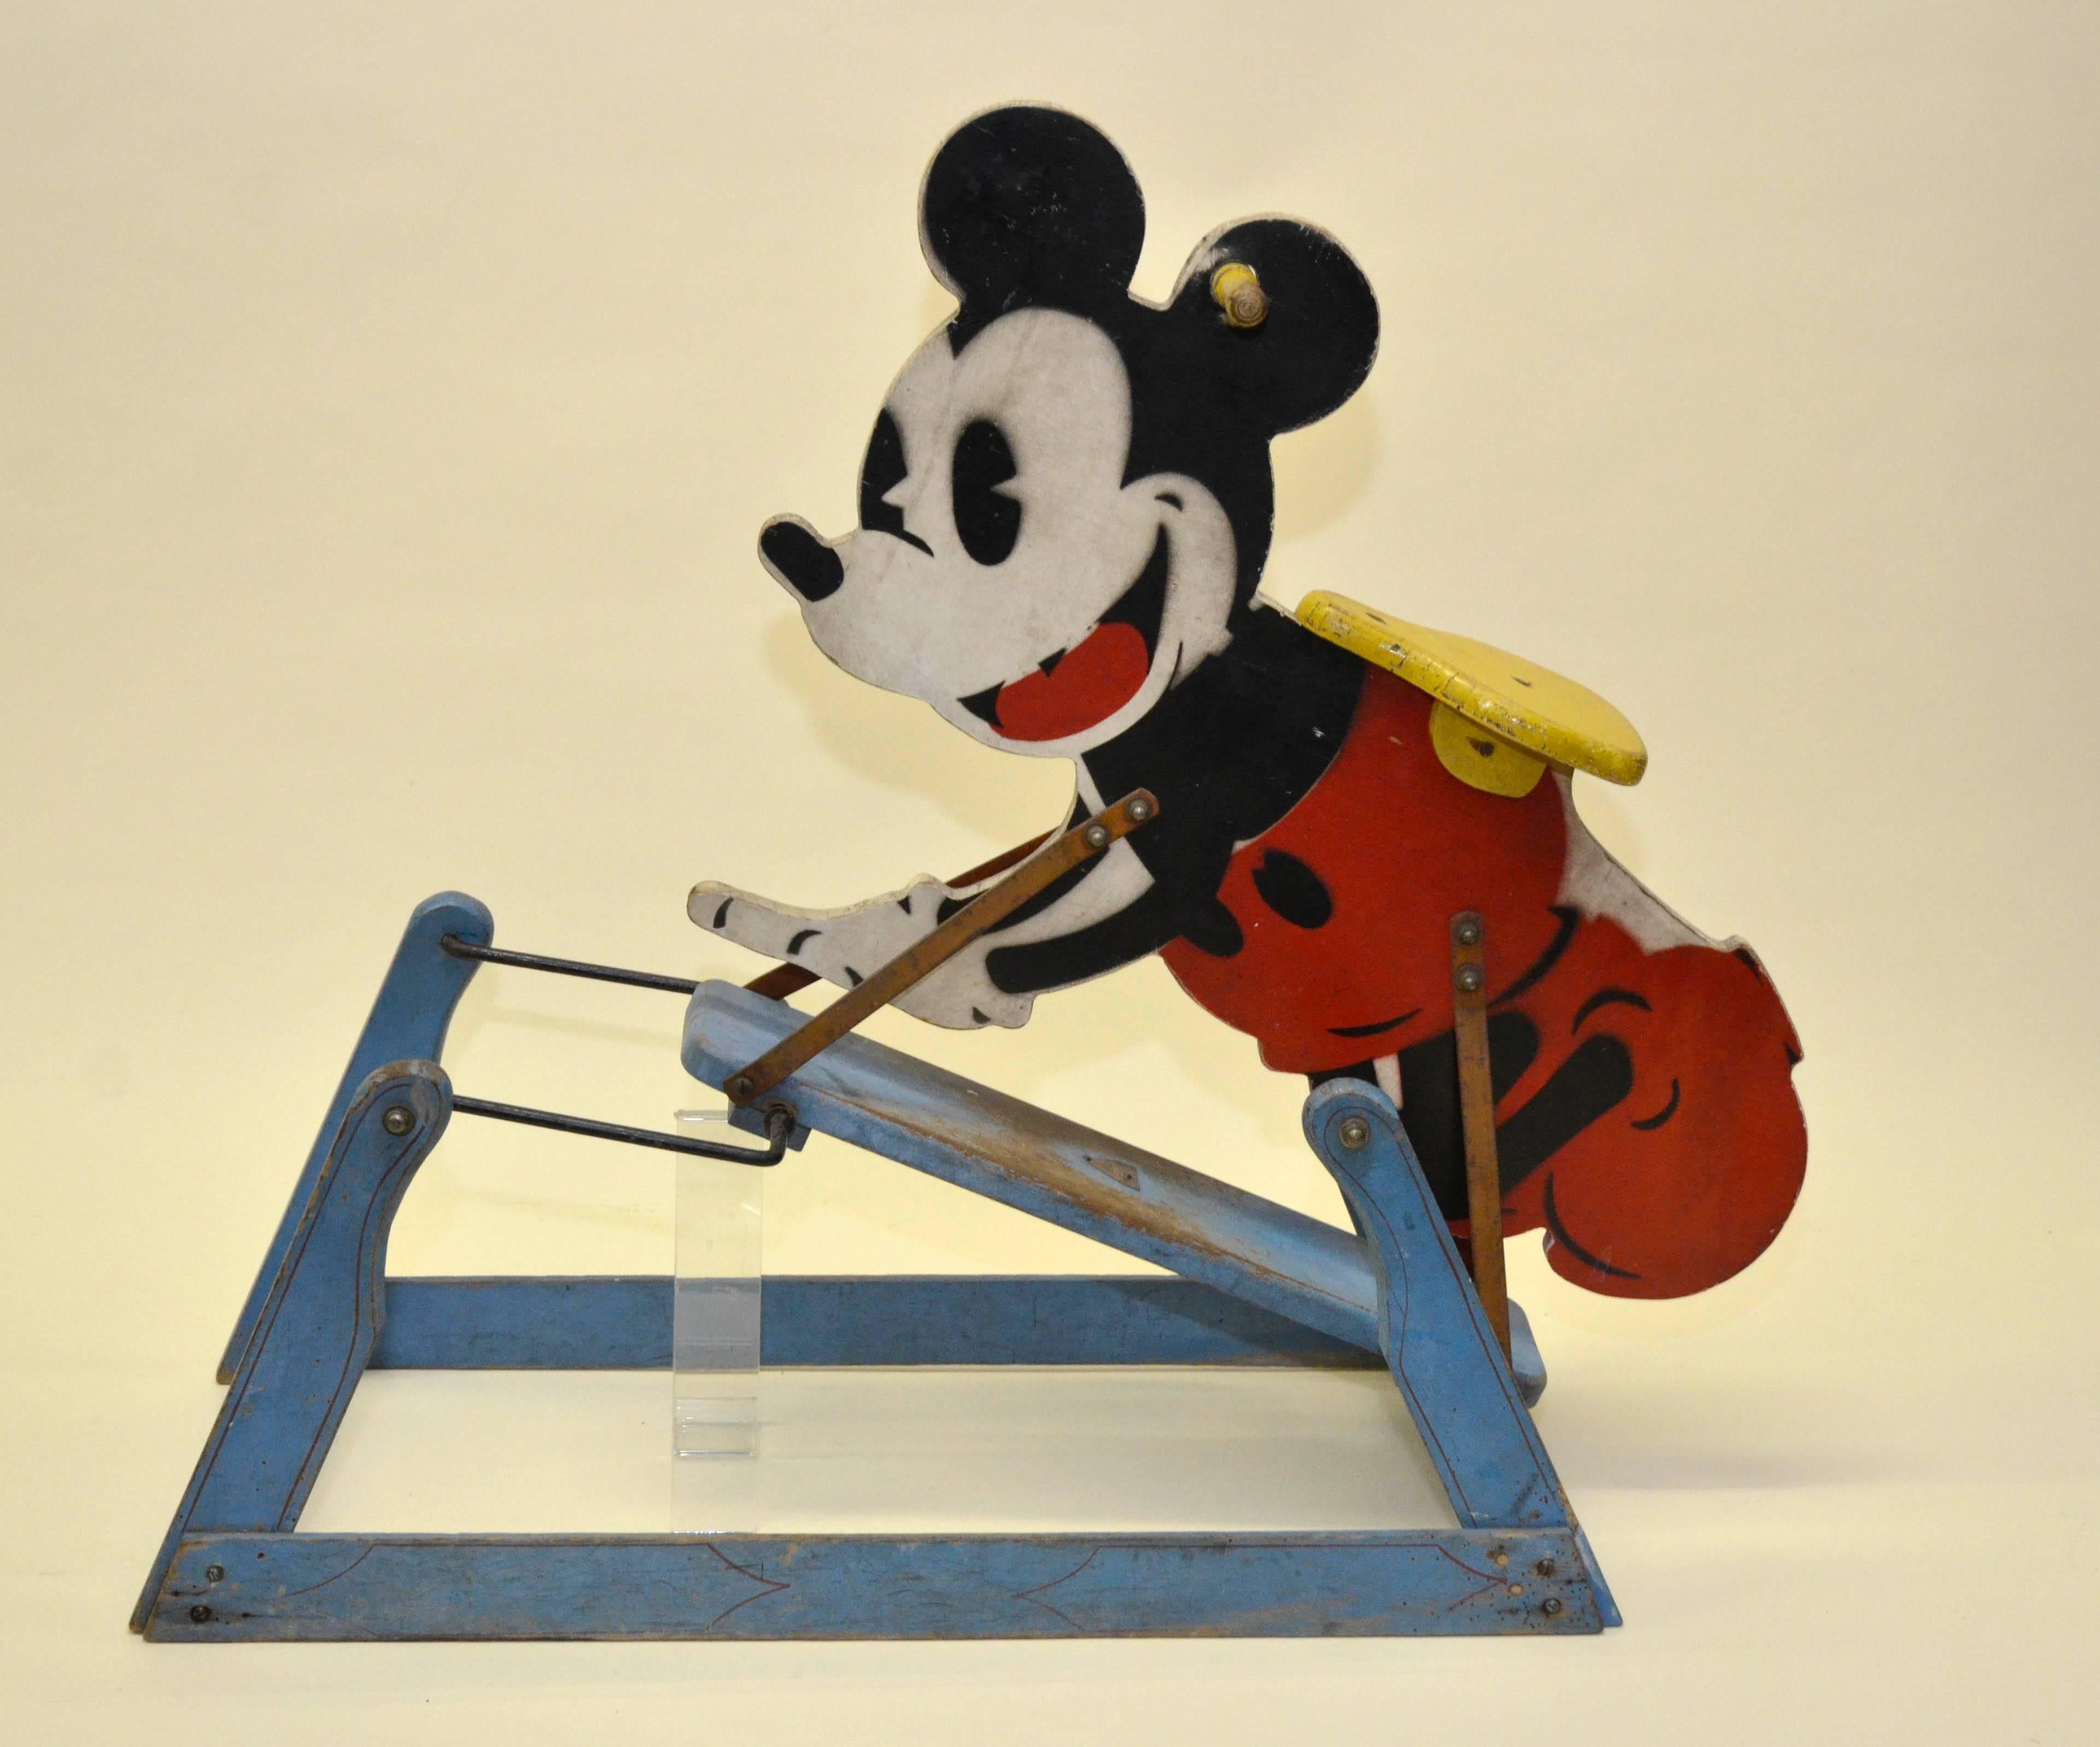 Metal 1940s Painted Wooden Tri-Ang Rocking Mickey Mouse Toy Made in England For Sale